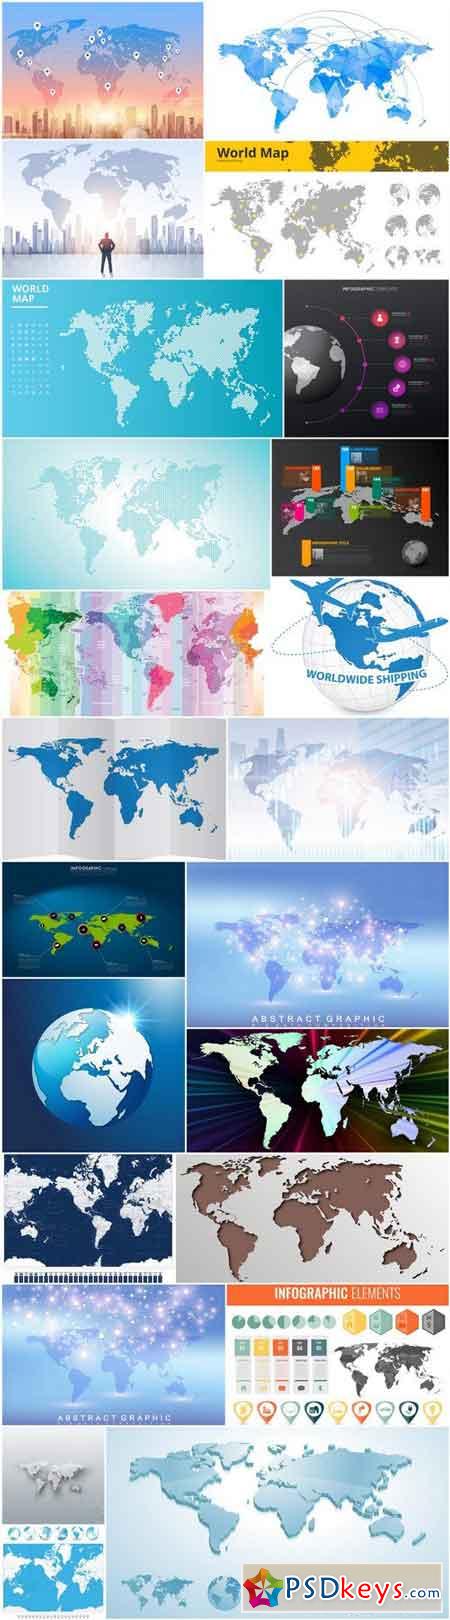 Modern World Map Collection - 25 Vector